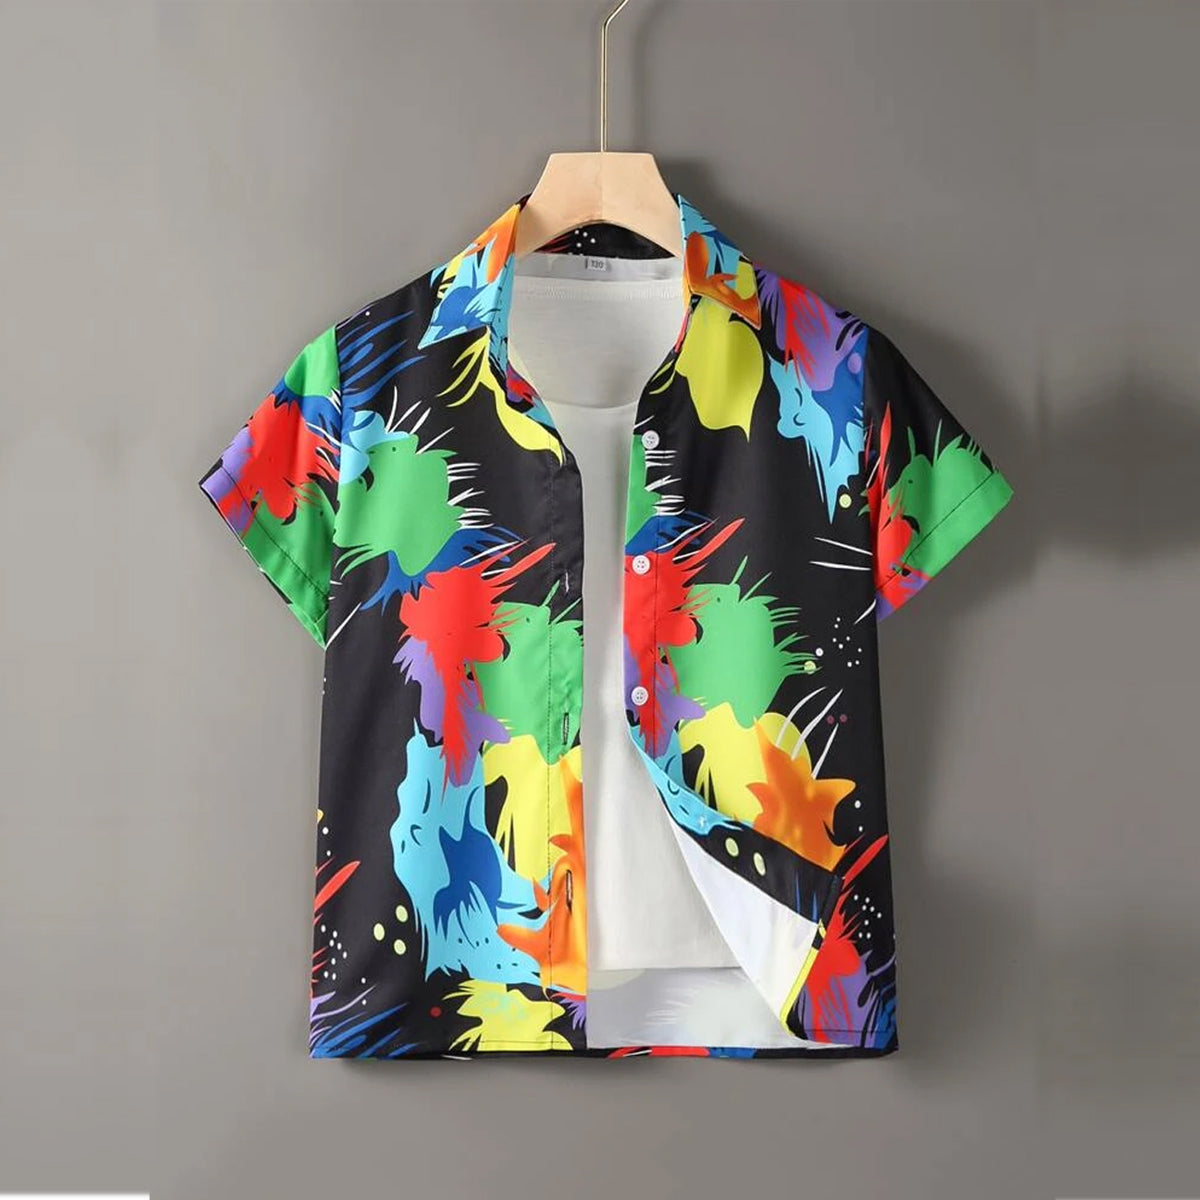 Venutaloza Boys Graphic Colorblock Shirt Without Tee For Boy.